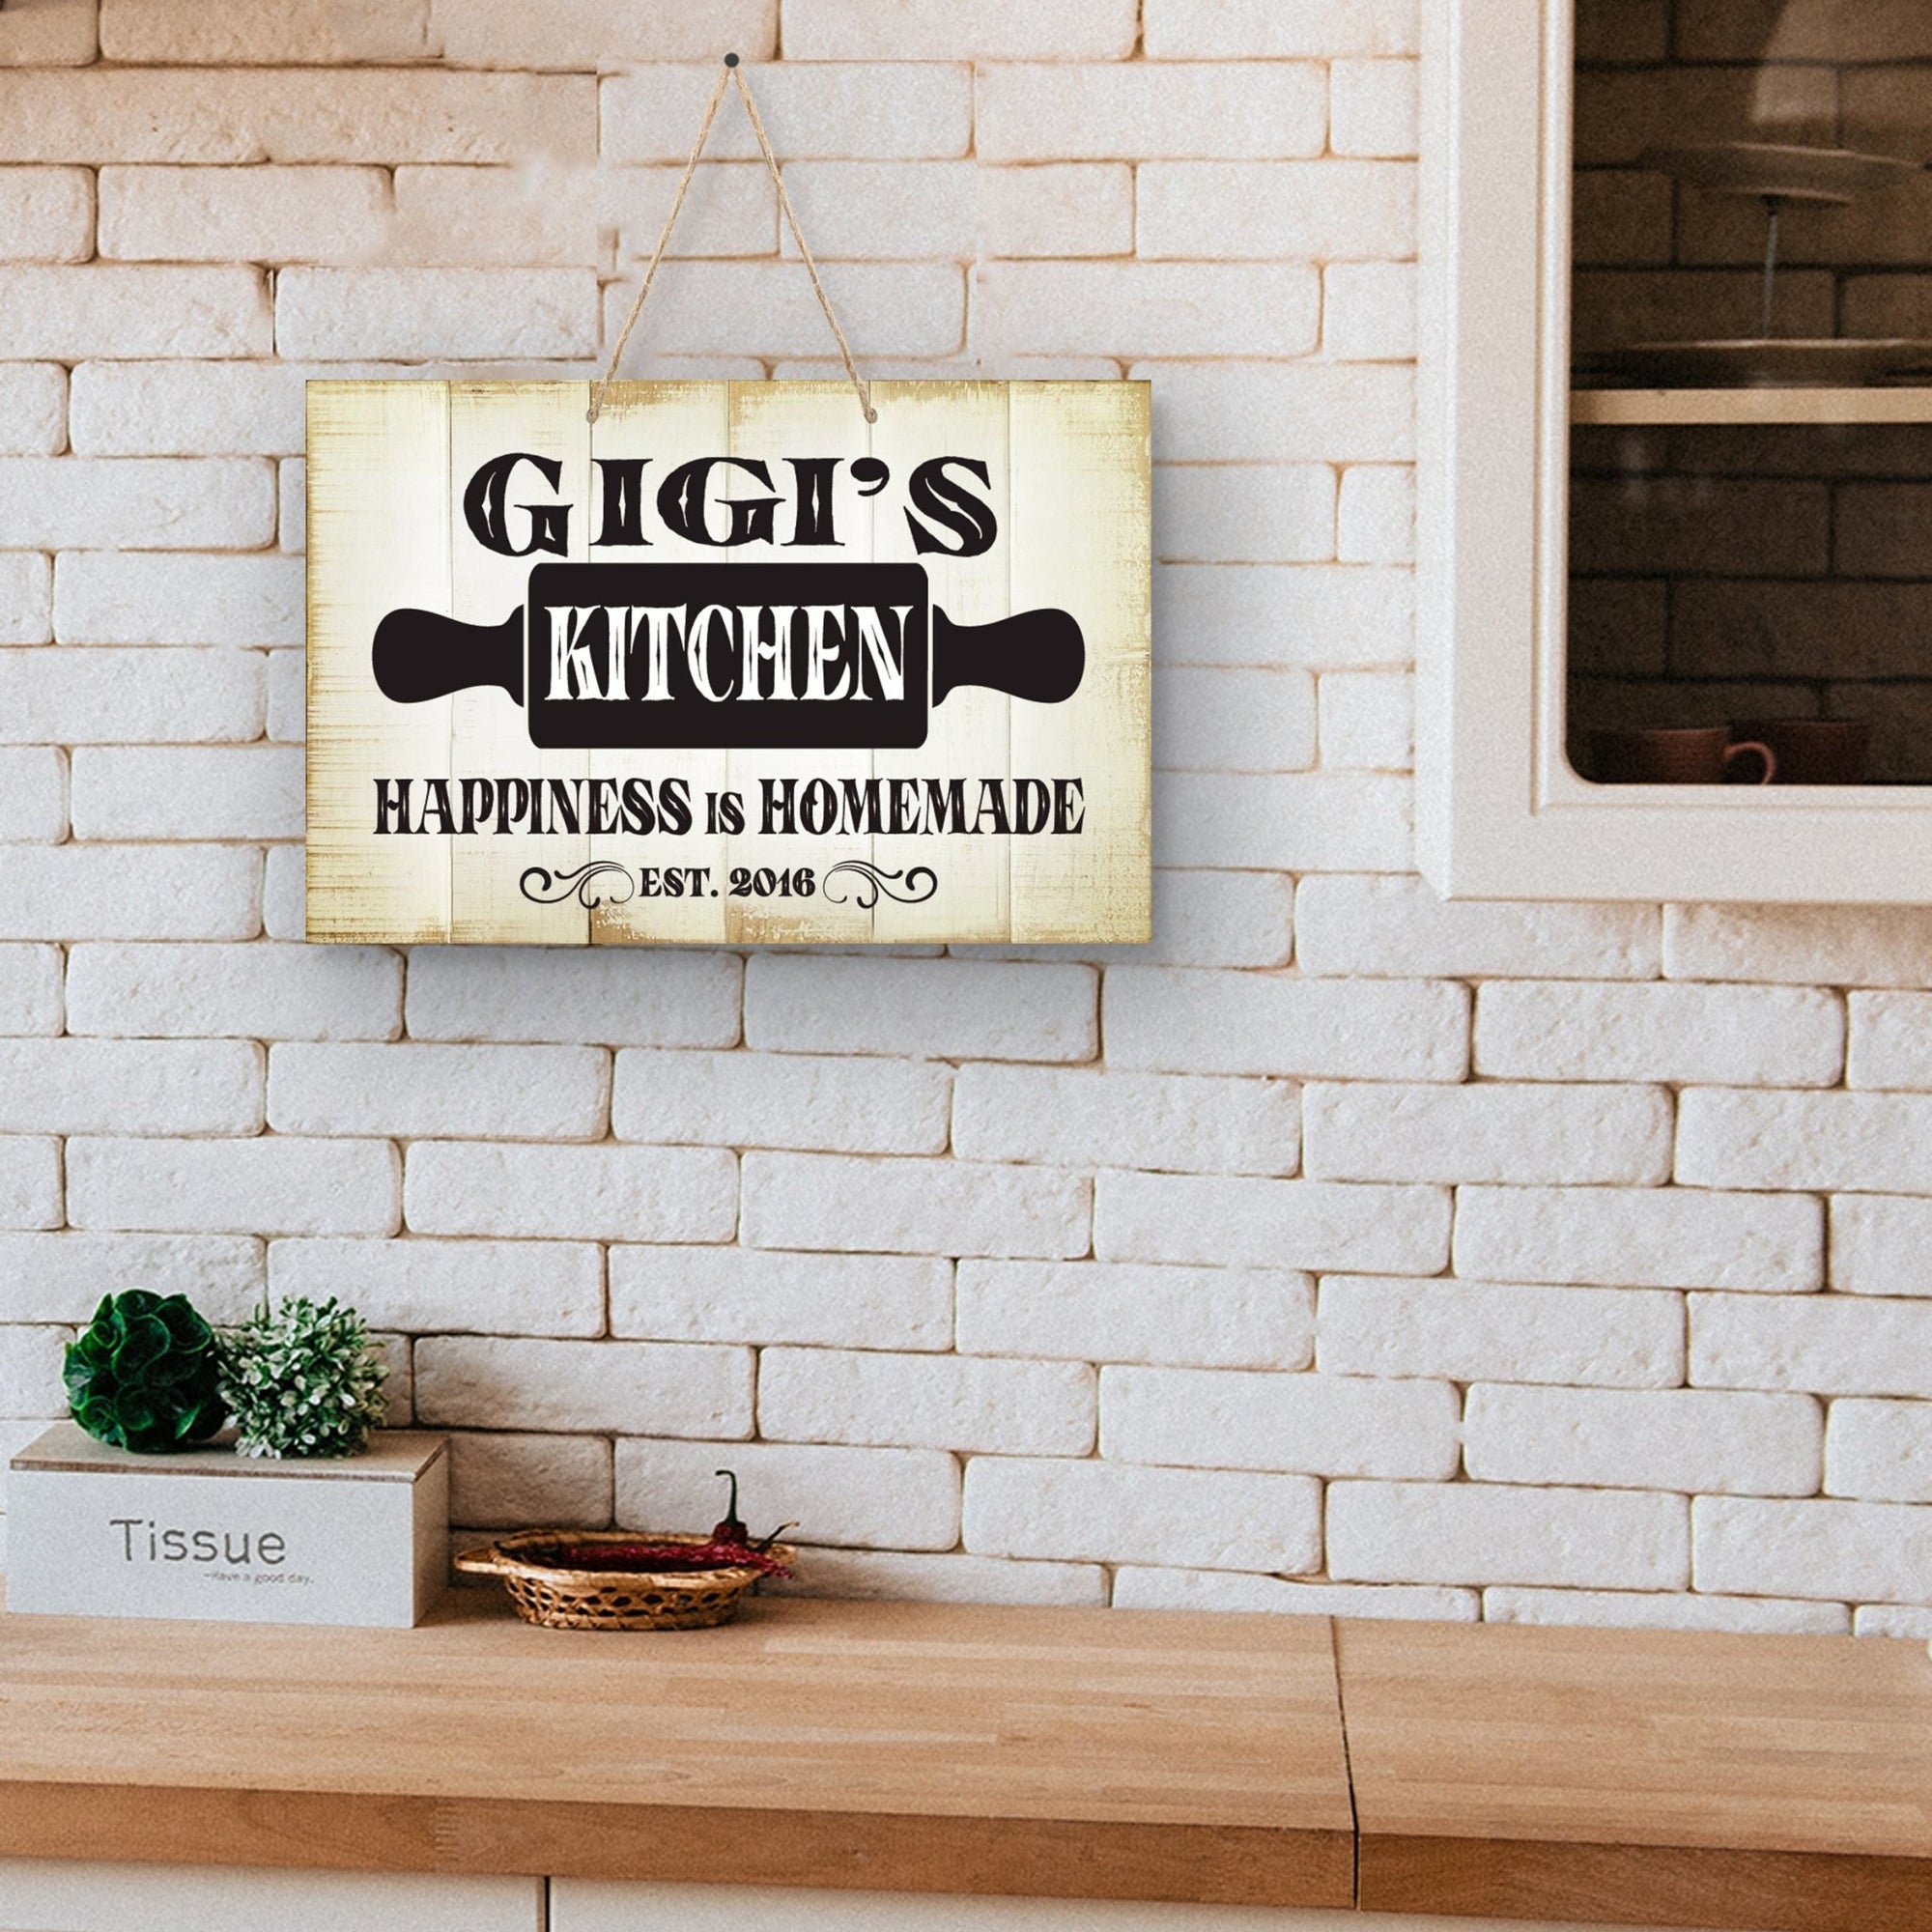 Inspirational Wooden Rustic Wall Hanging Rope Sign Kitchen Home Décor - Happiness Is Homemade [KITCHEN] - LifeSong Milestones